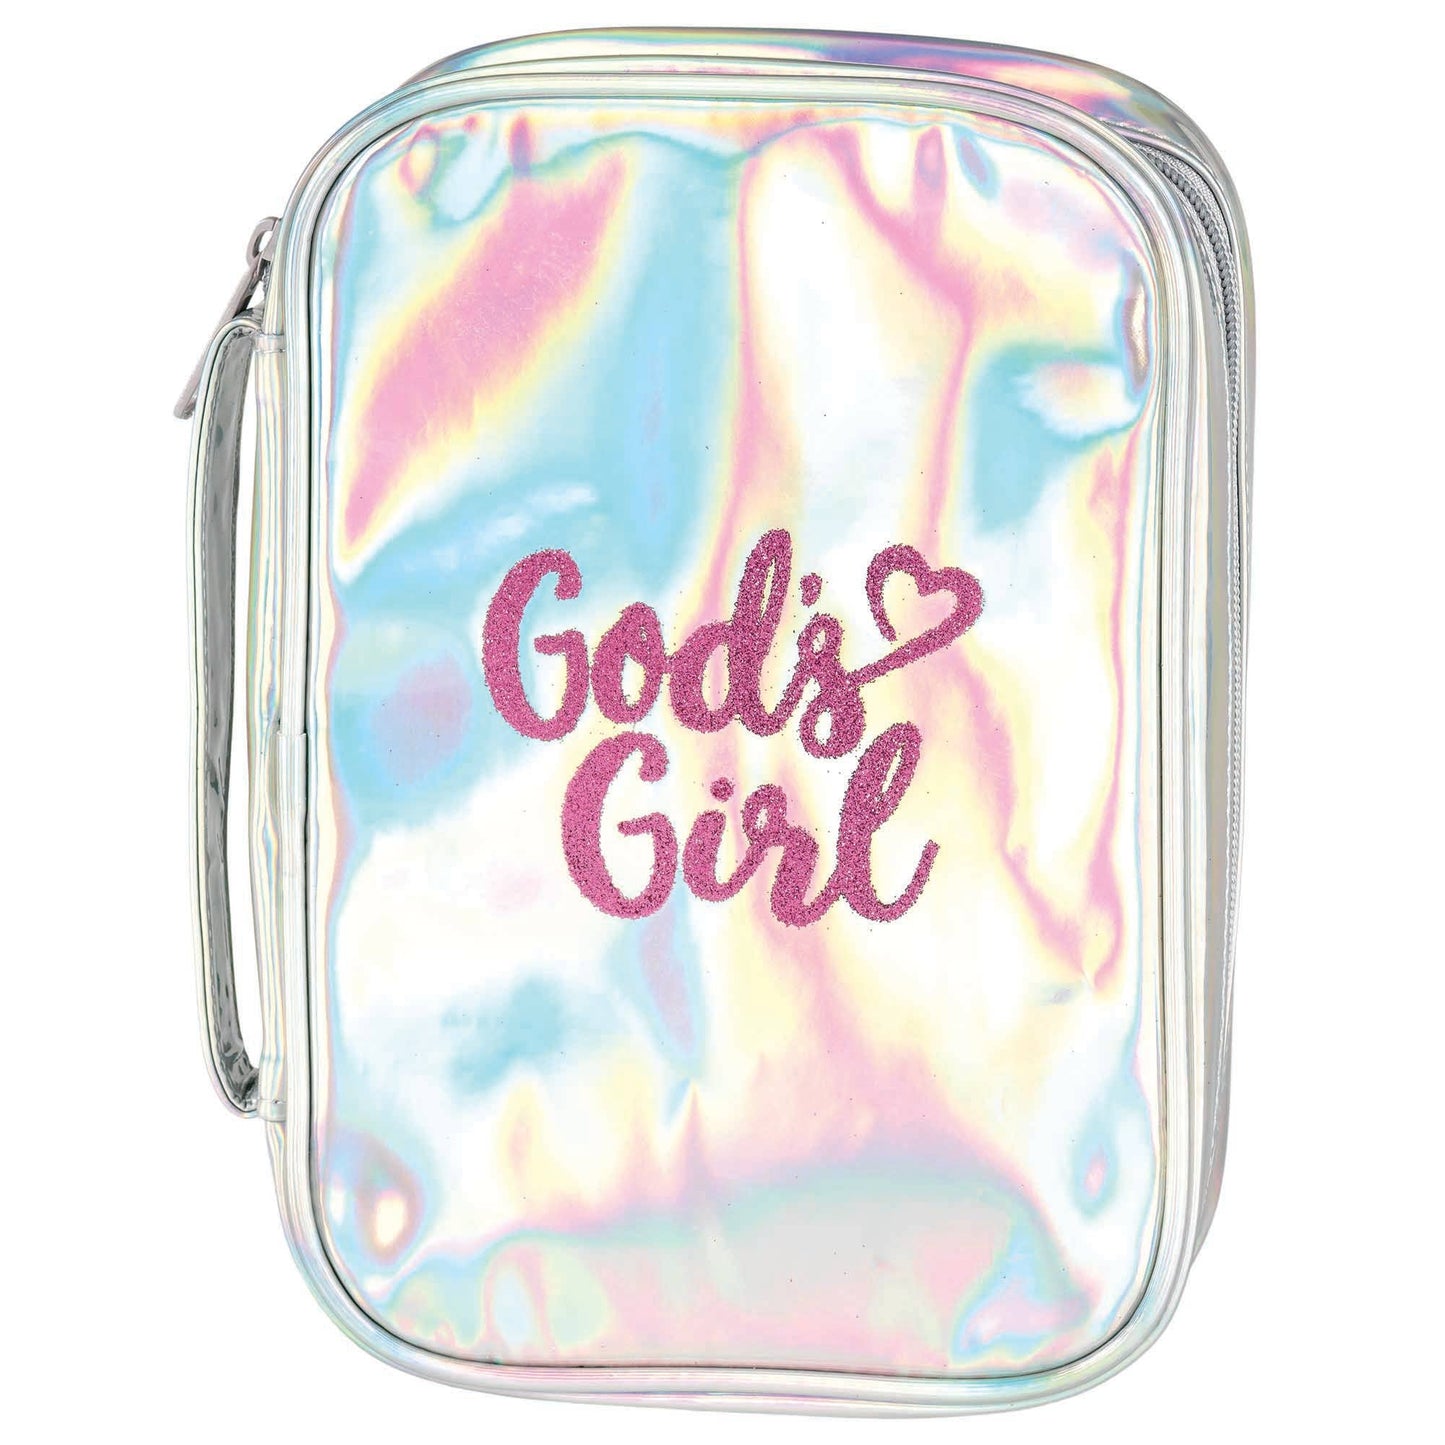 Dicksons - GOD'S GIRL BIBLE COVER SHINY SILVER LARGE